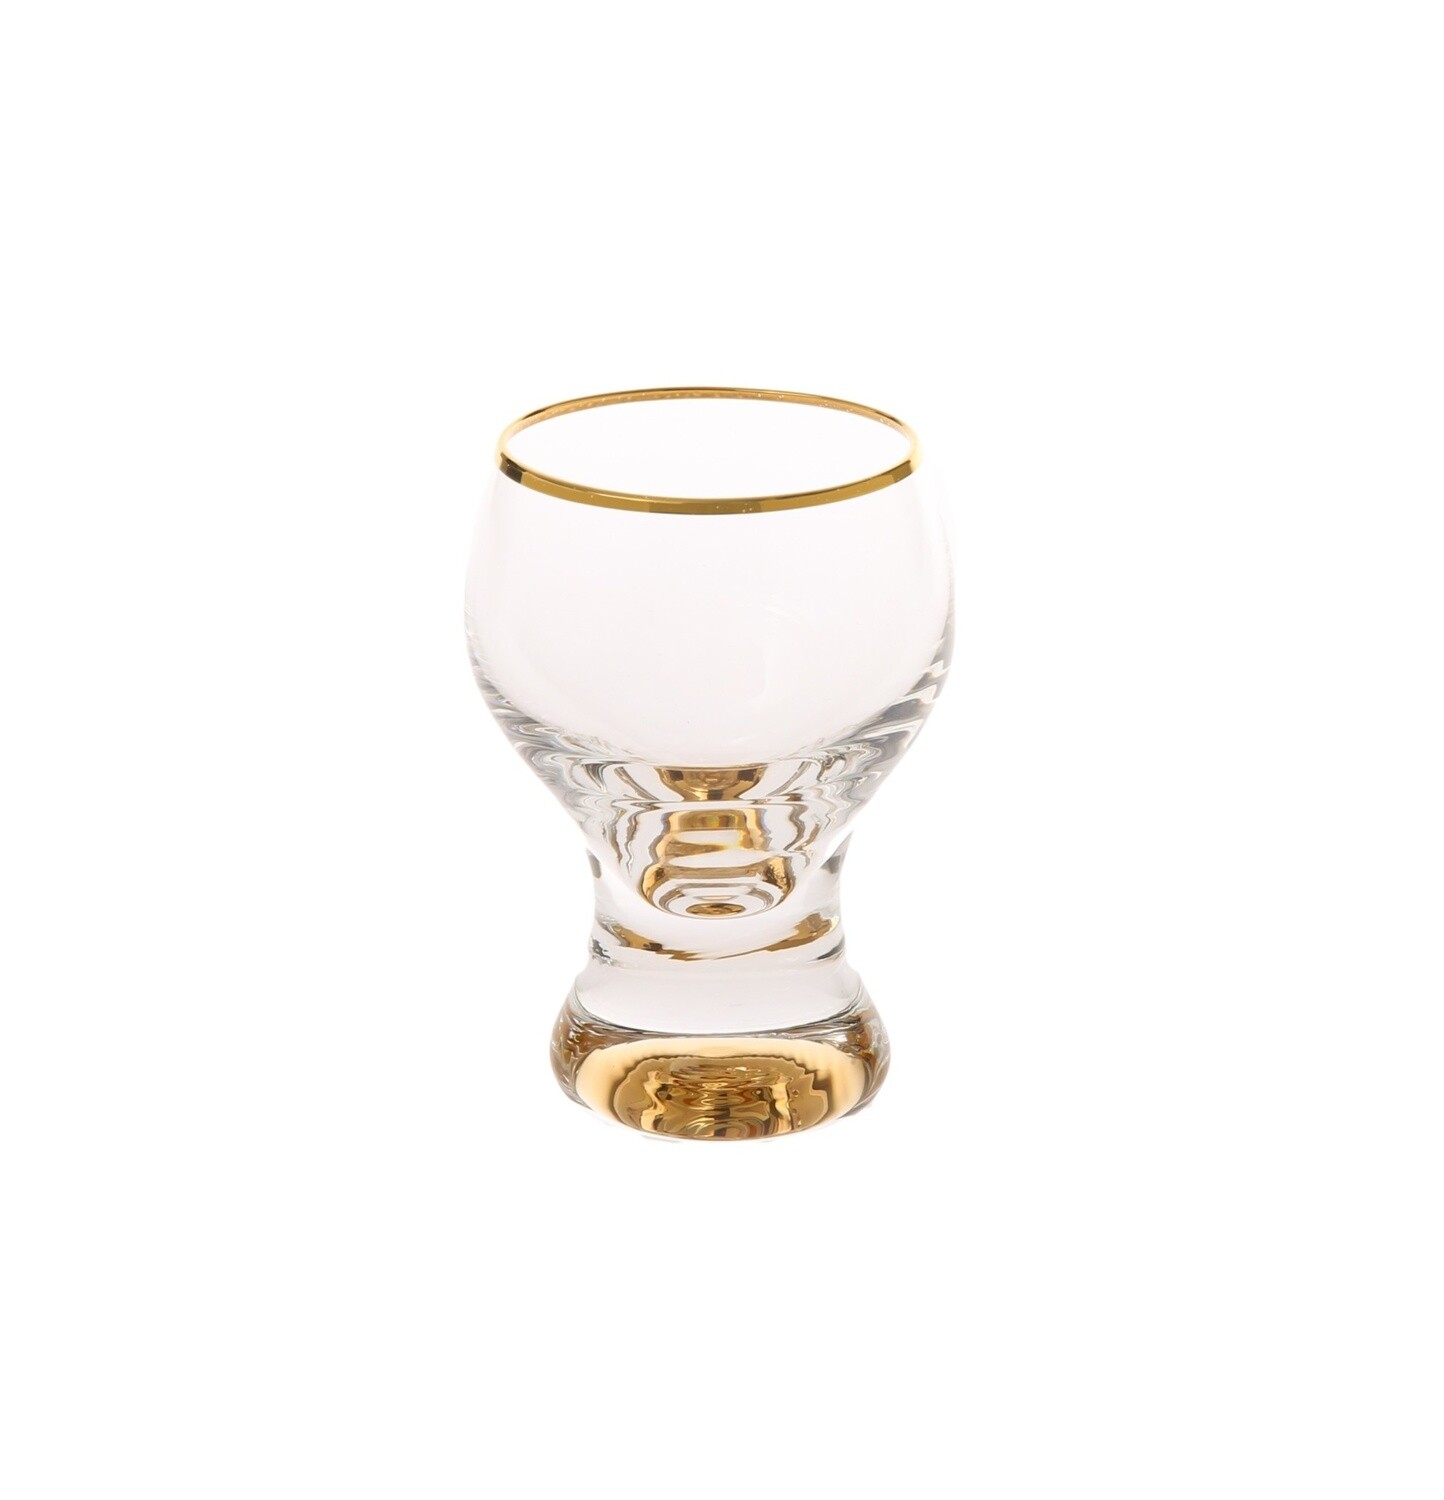 Shot Glasses with gold stem and rim s/6